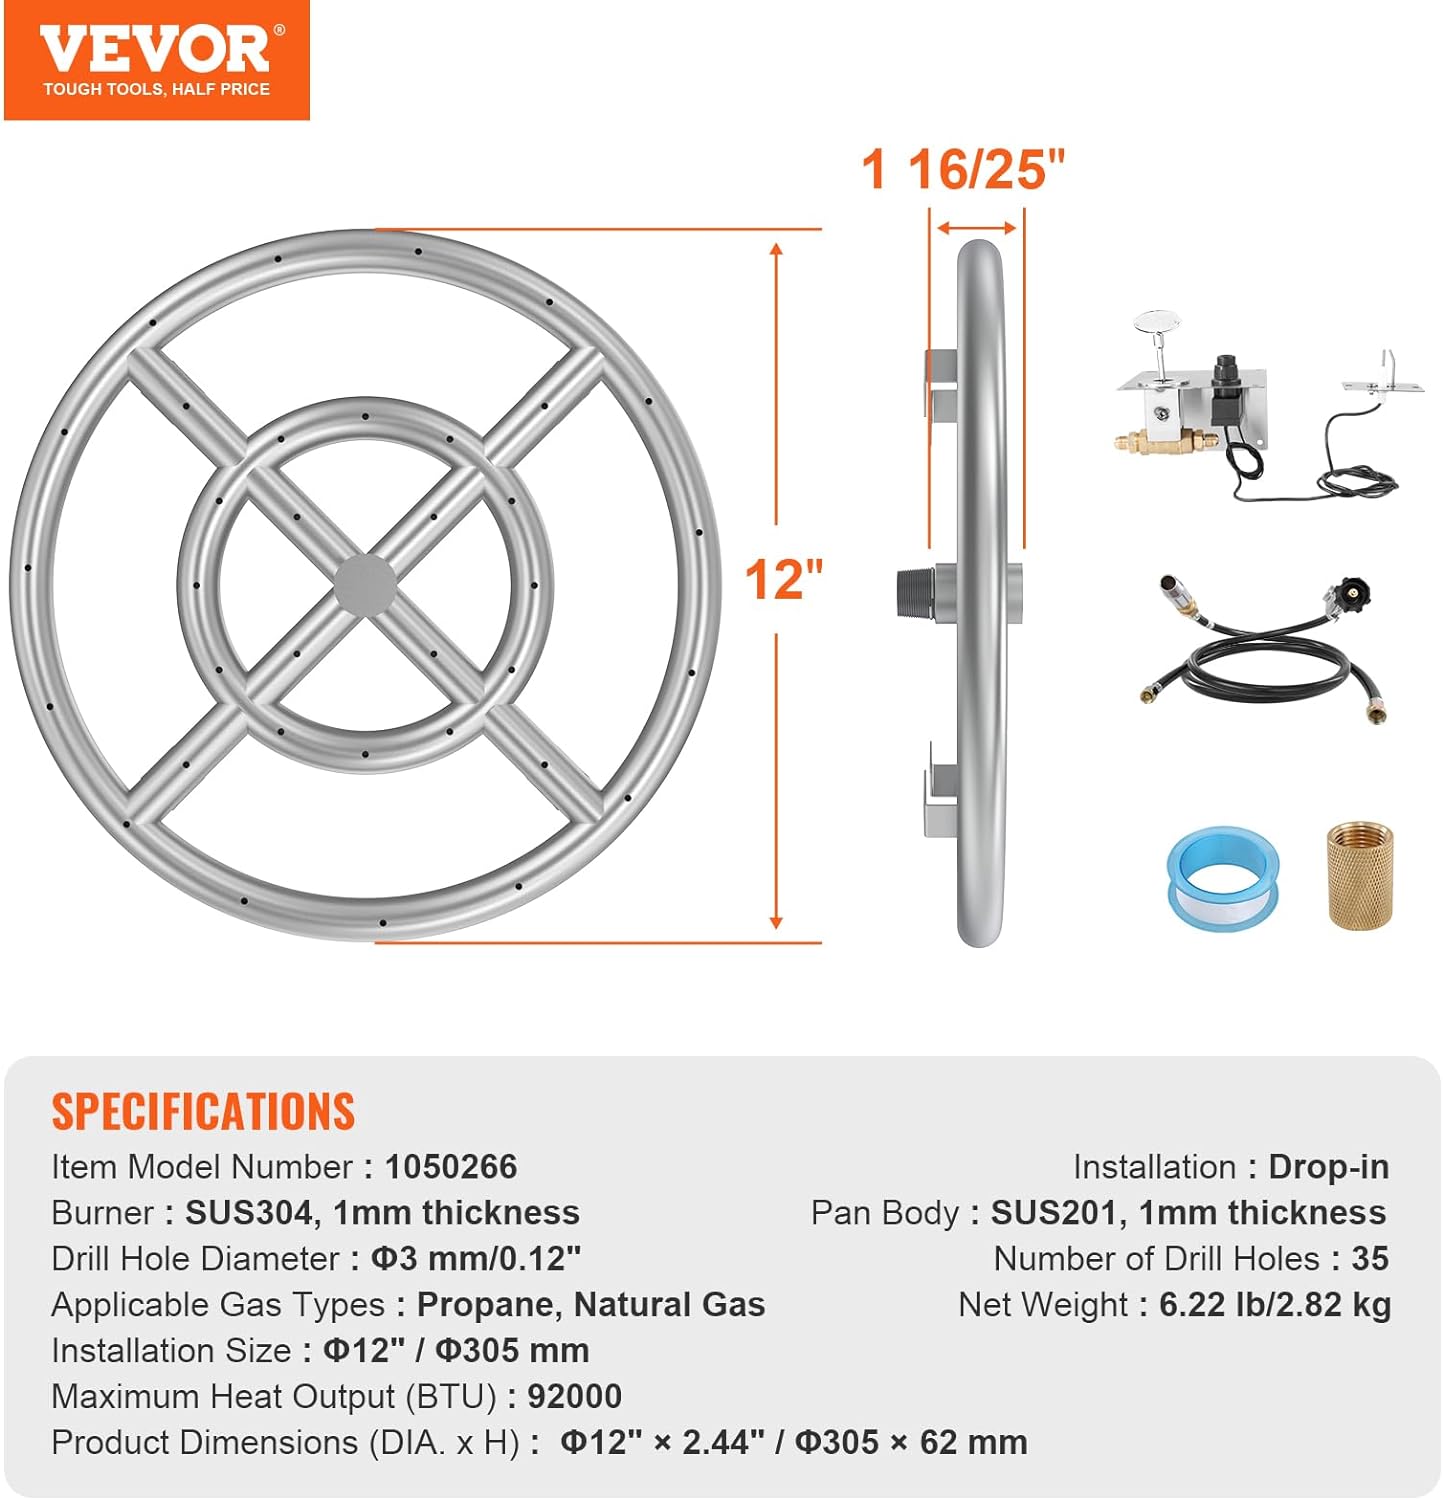 VEVOR 12 inch Round Drop-in Fire Pit Pan, Stainless Steel Fire Pit Burner Kit, Propane Gas Fire Pan with 92,000 BTU for Indoor or Outdoor Use